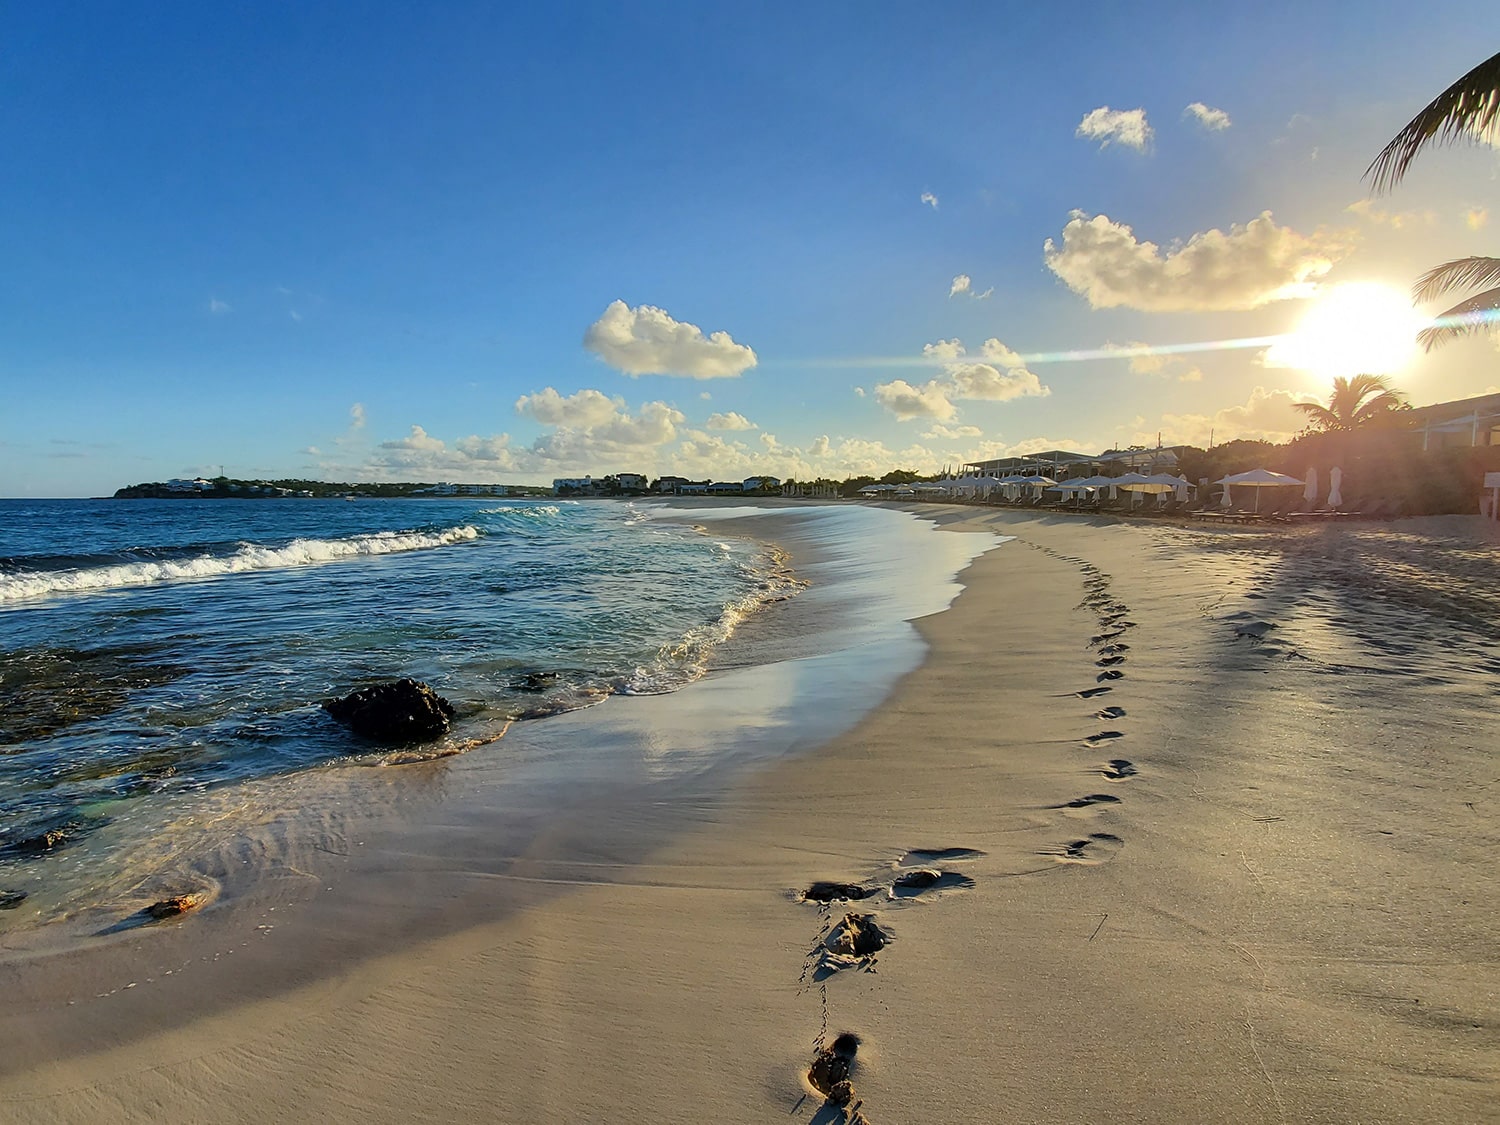 The beach at Frangipani Beach Resort, located on Meads Bay in Anguilla.